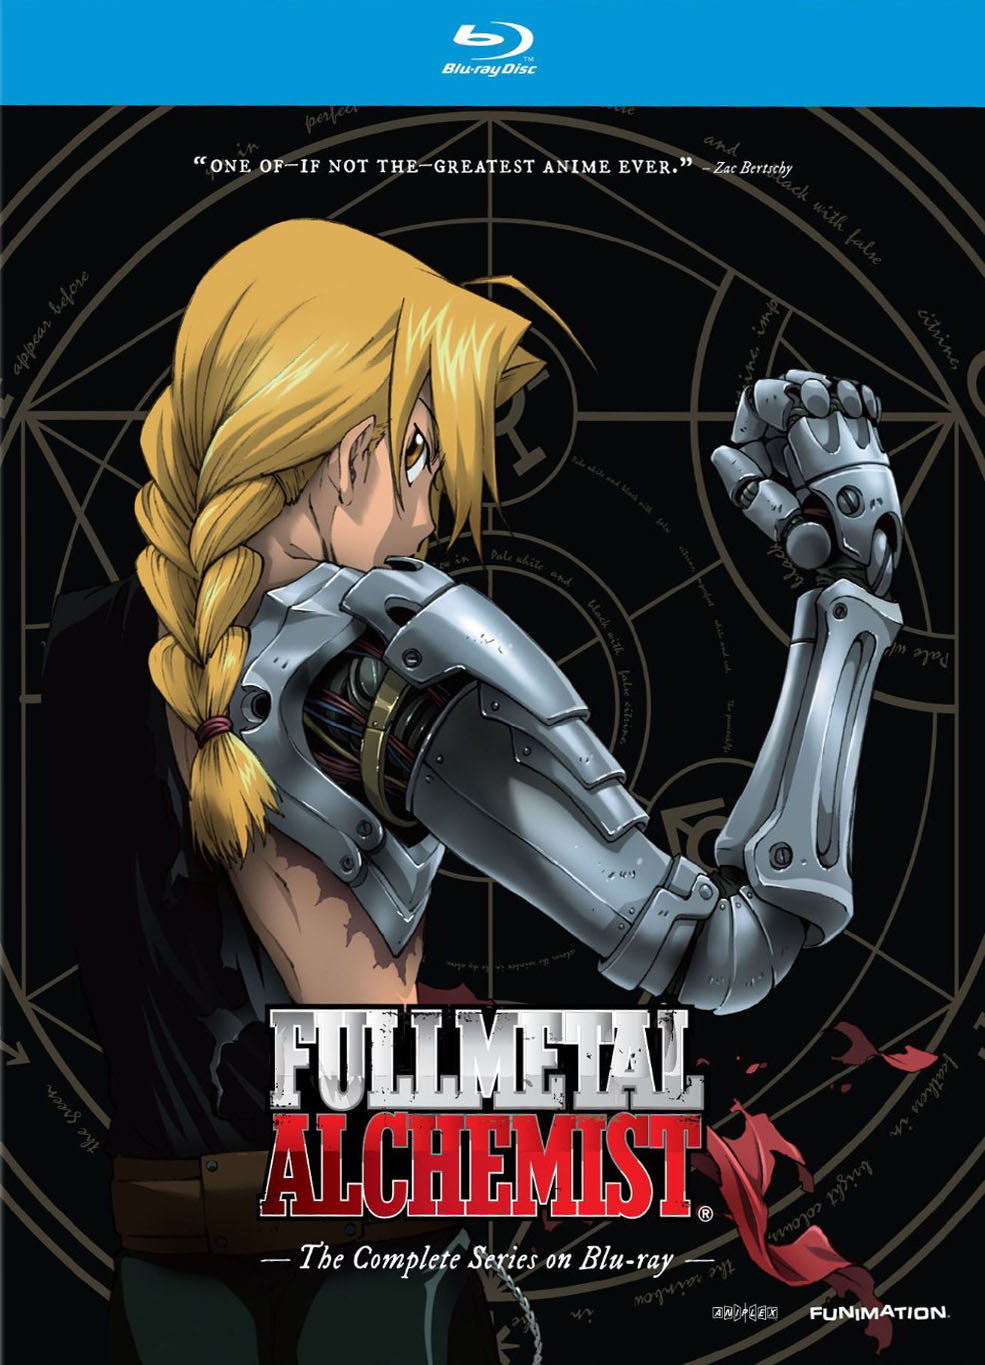 Top 5 Essential Anime To Watch  Why Fullmetal Alchemist: Brotherhood is  The Greatest Anime 